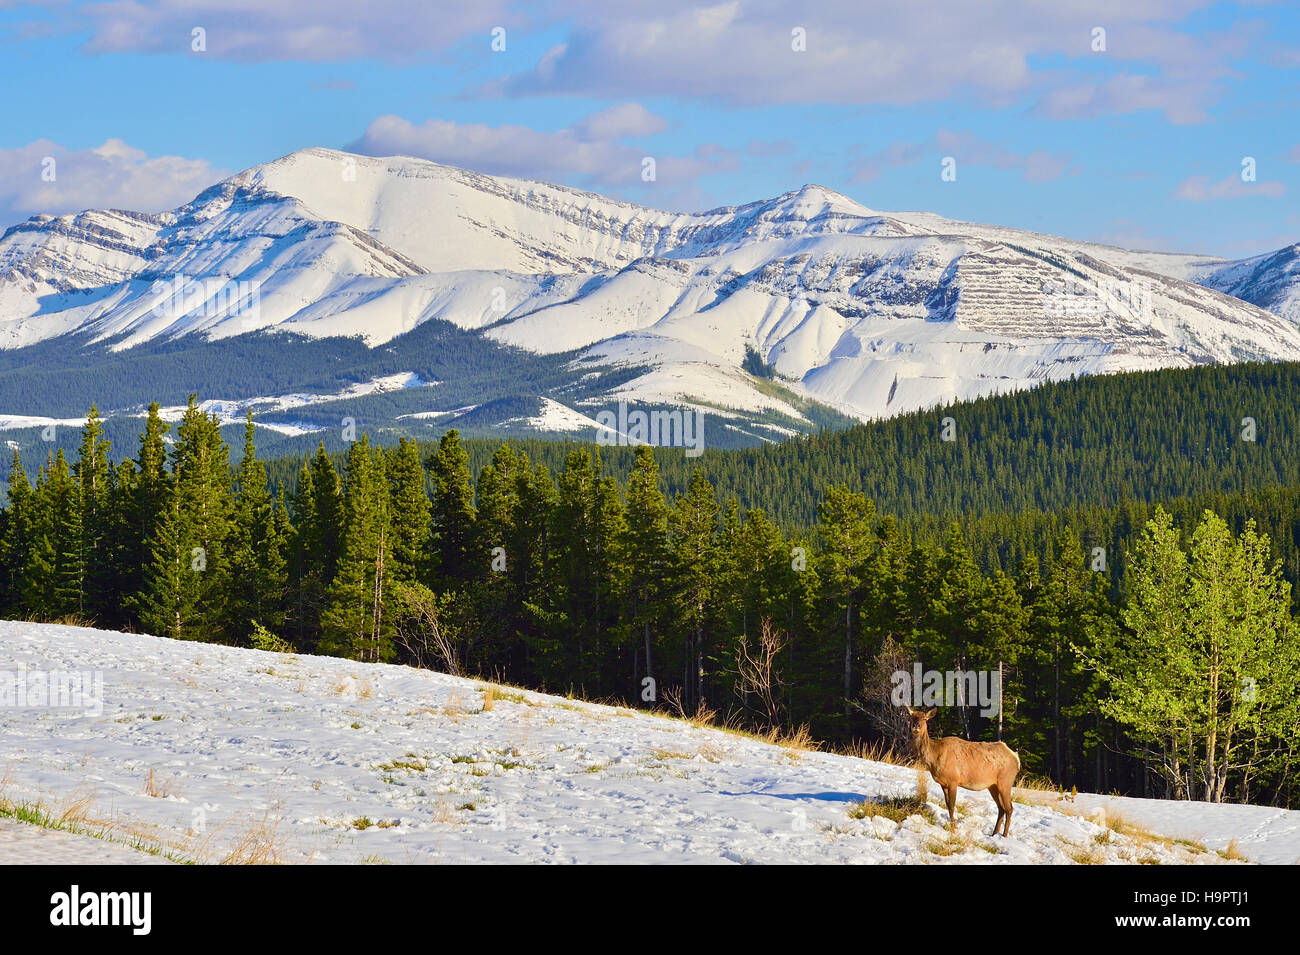 The rocky mountains of Alberta Canada white with a covering of fresh spring snow Stock Photo